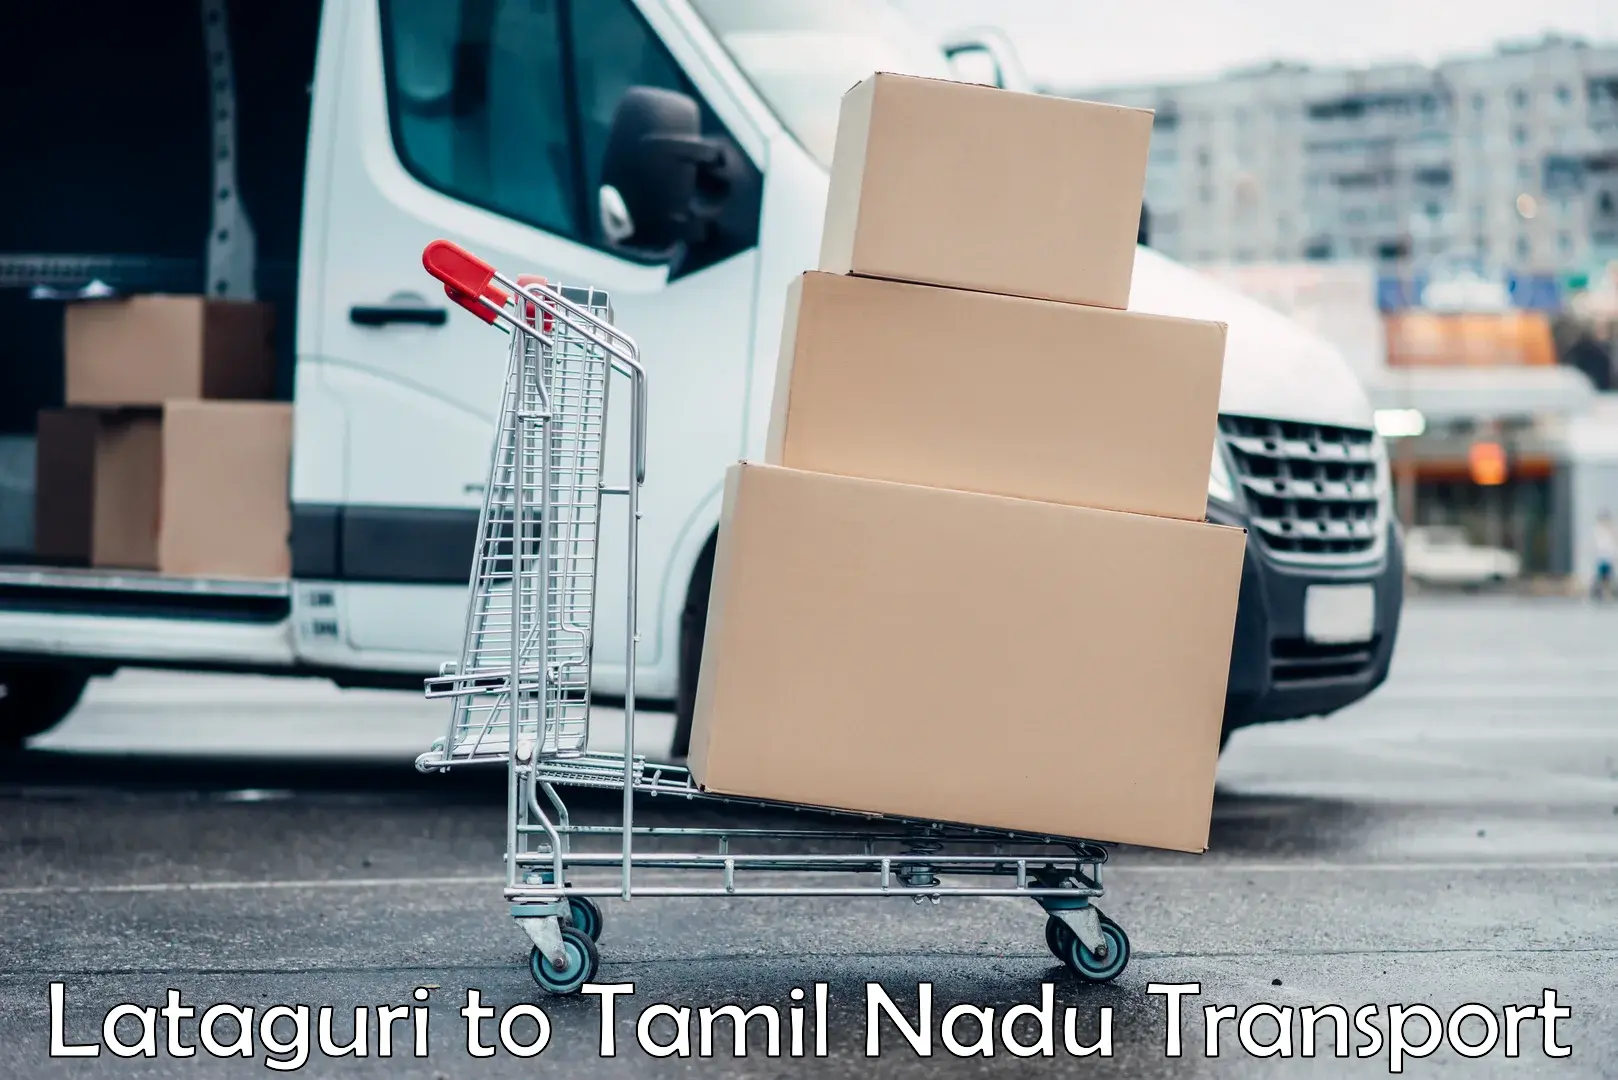 Package delivery services Lataguri to Tamil Nadu